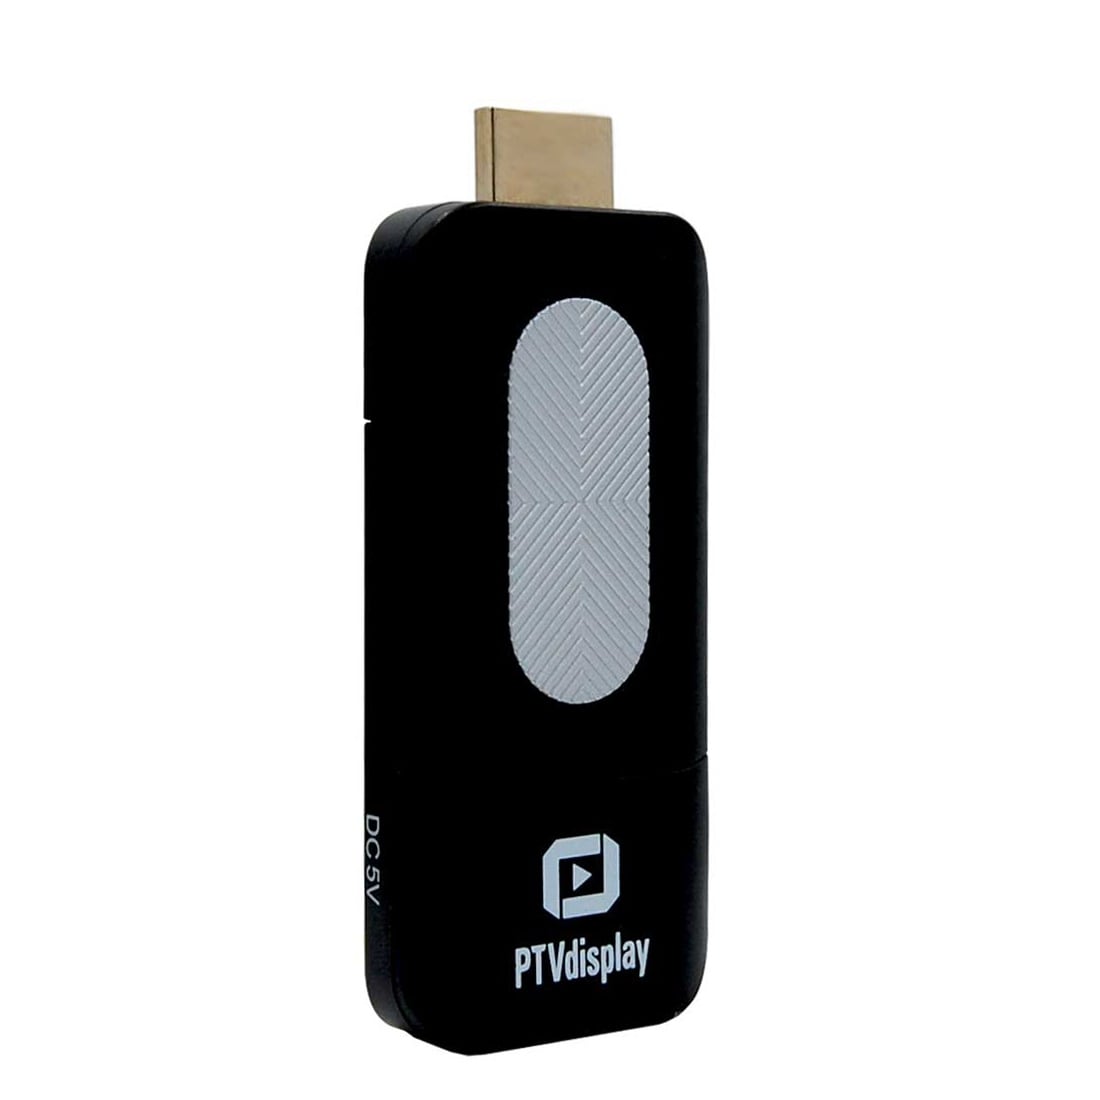 AnyCast WiFi TV Miracast Airplay HDMI Dongle - iPhone Samsung Android